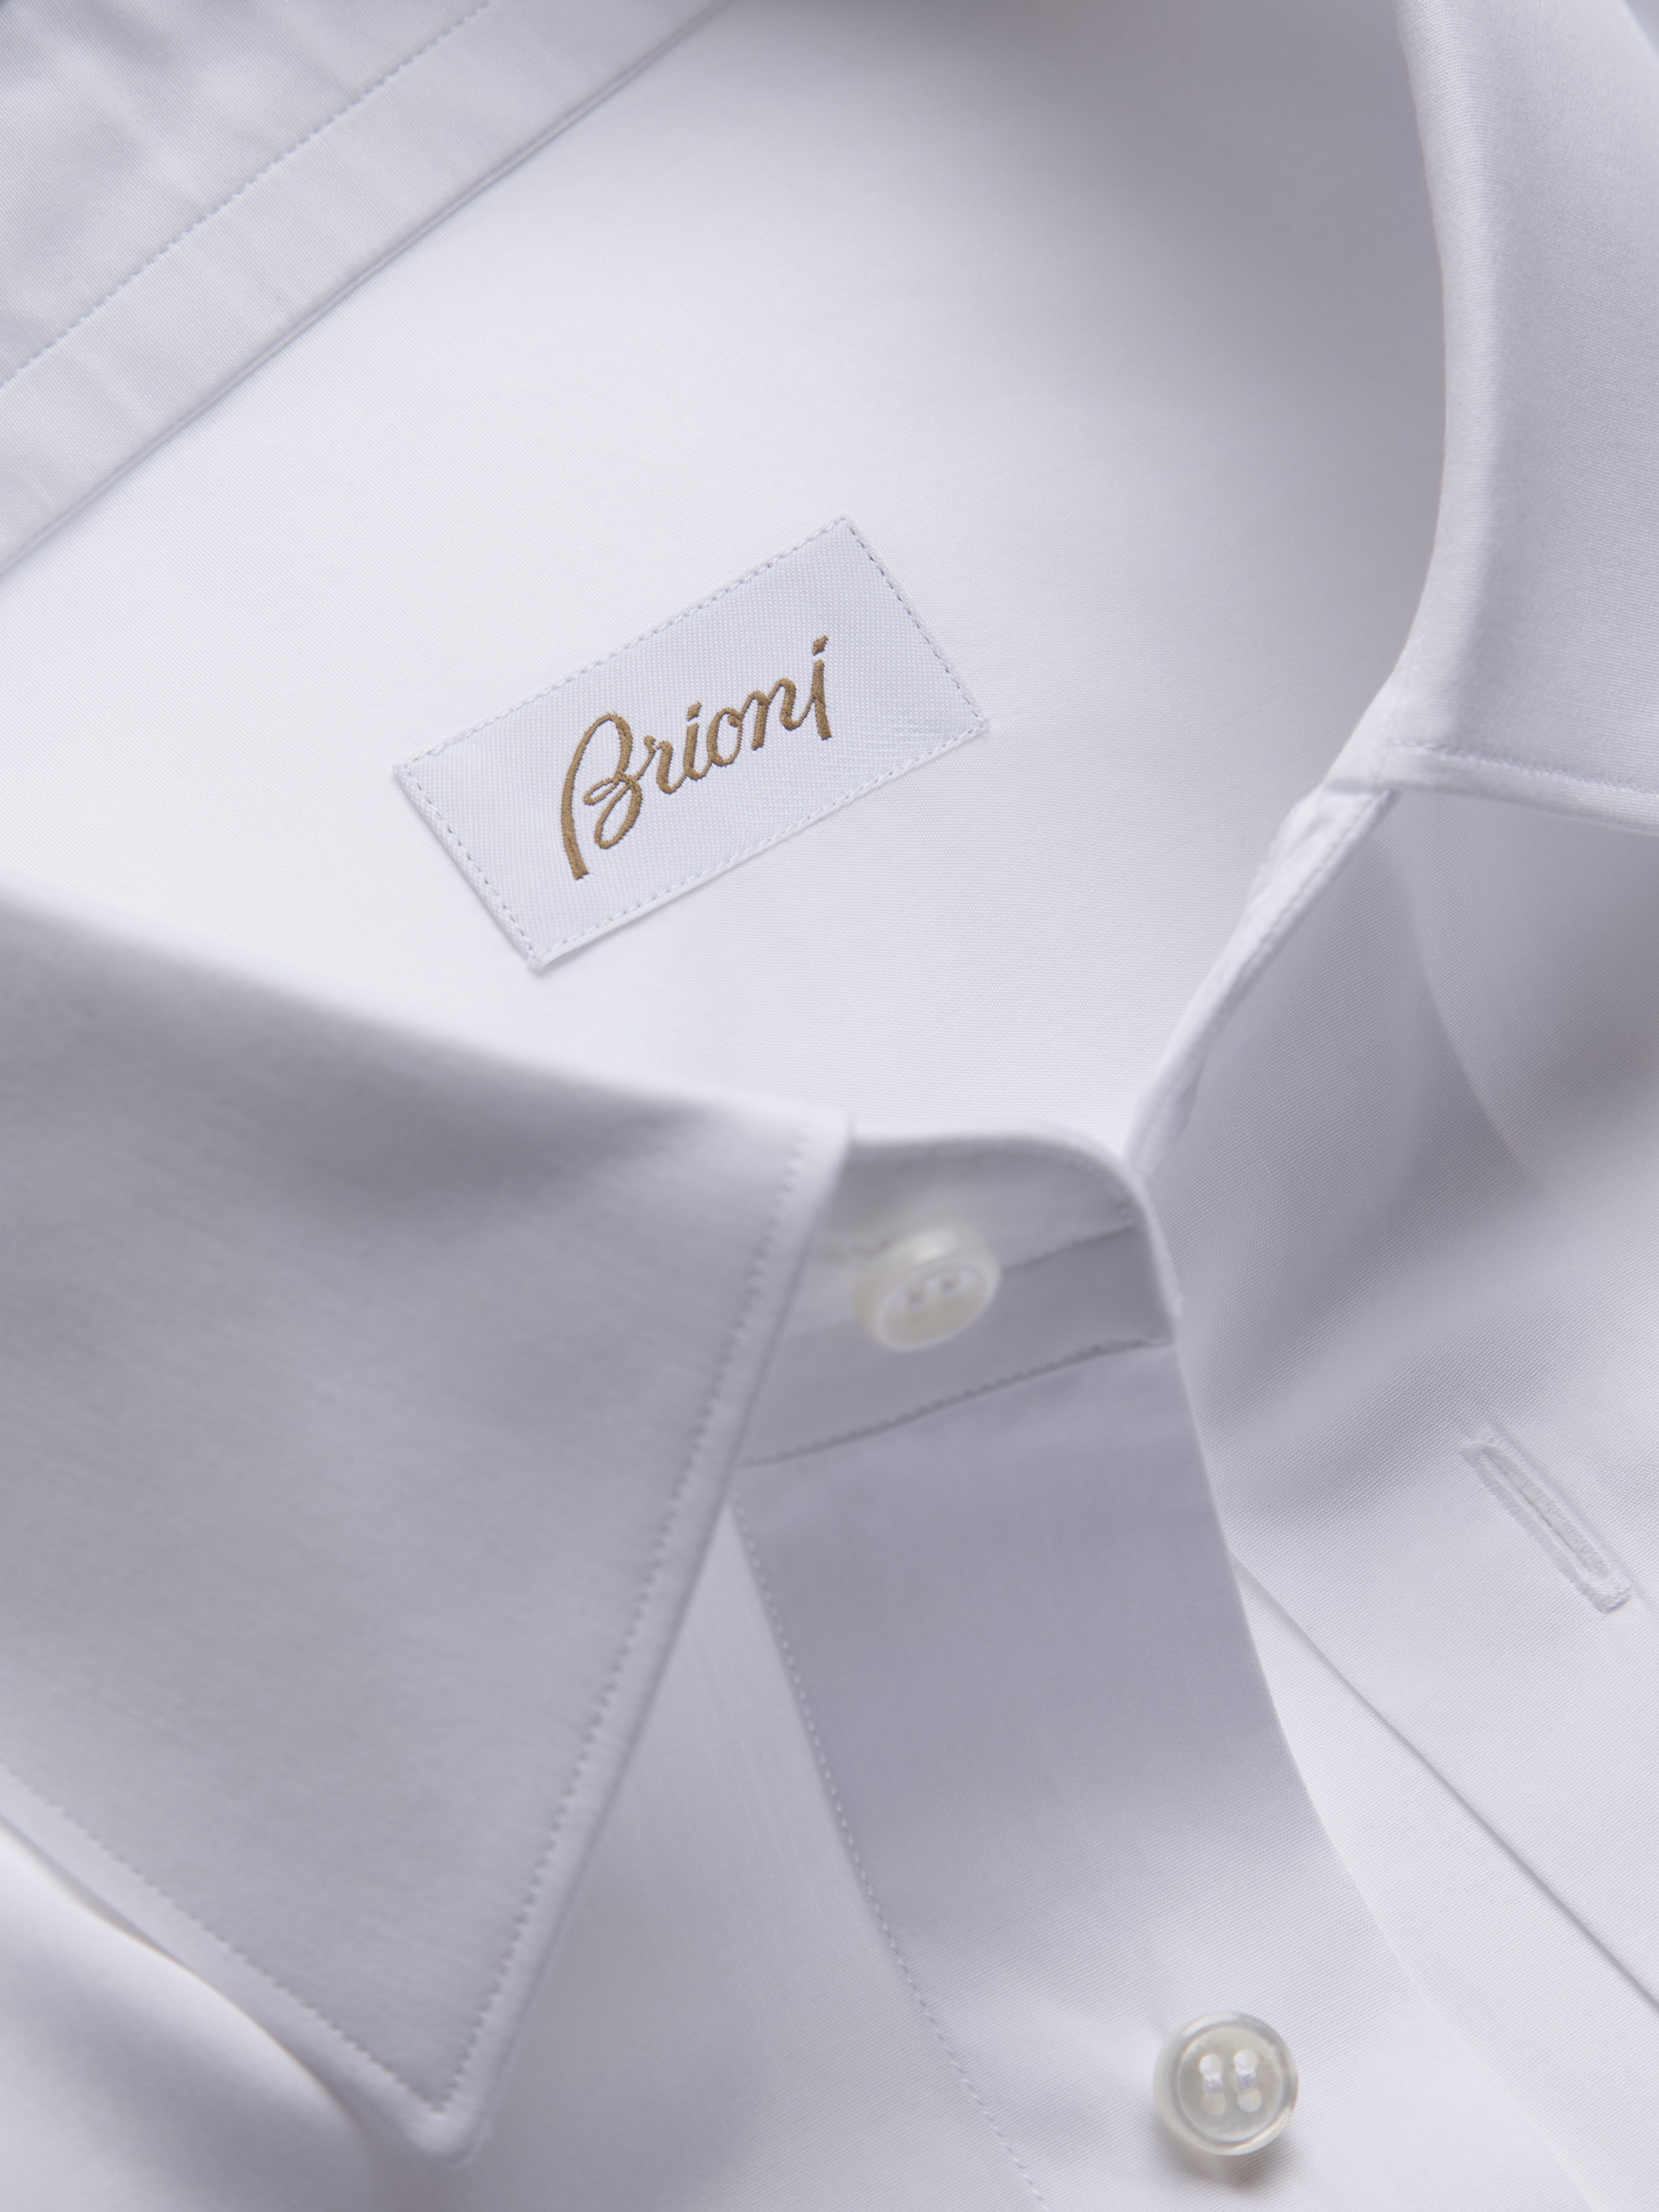 Shirts  Brioni® US Official Store